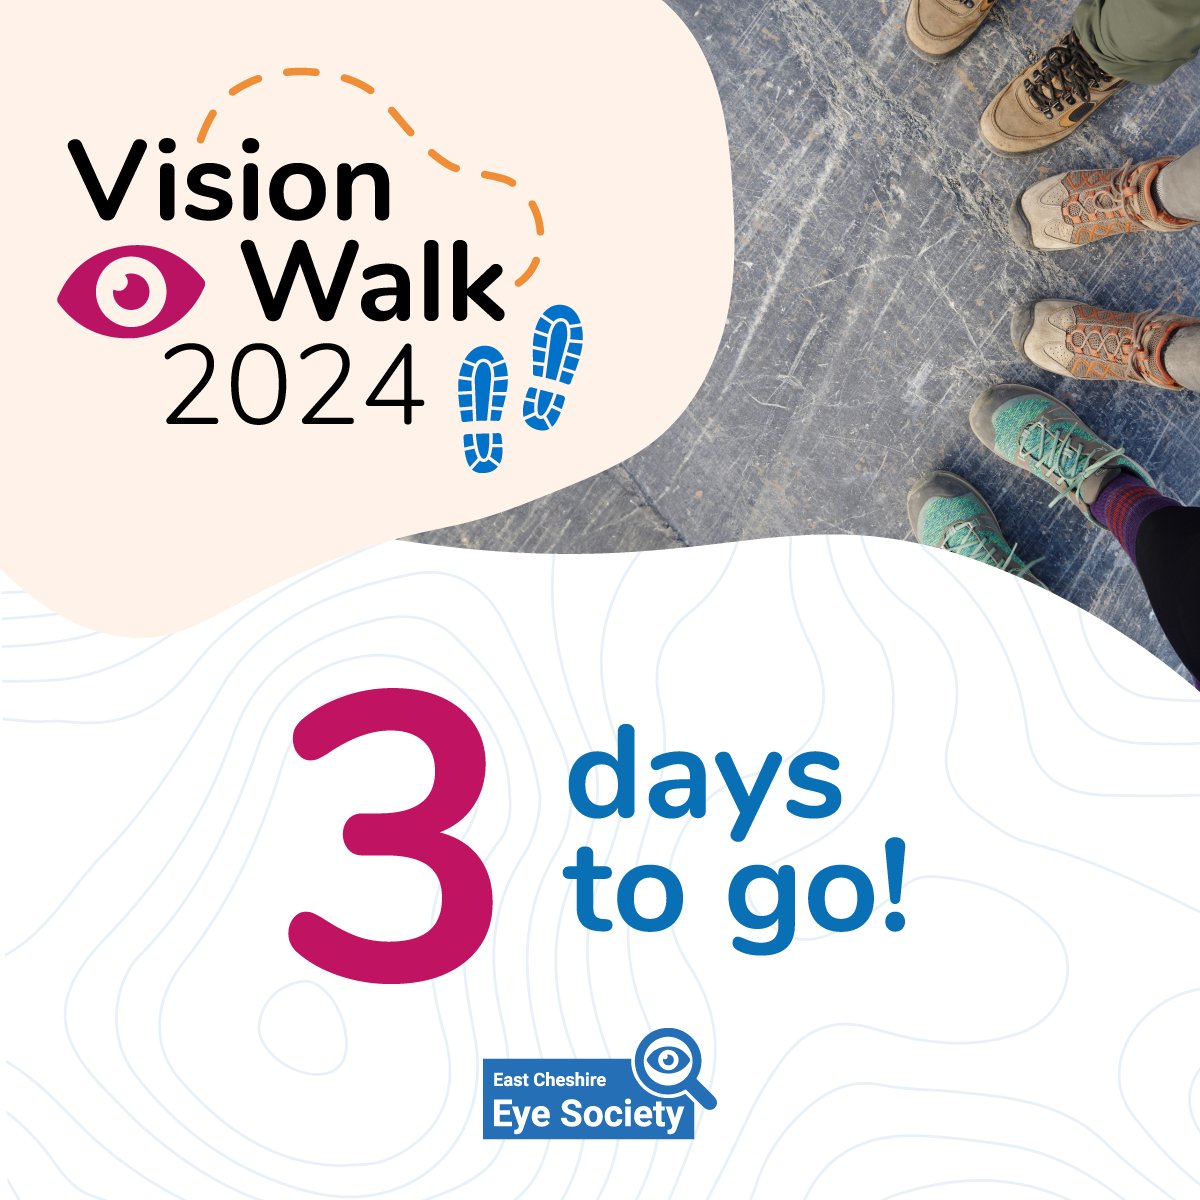 THREE days to go until Vision Walk 2024!

For more information, just click here: ecs.page.link/wbpSQ

#VisionWalk2024 #Cheshire #Macclesfield